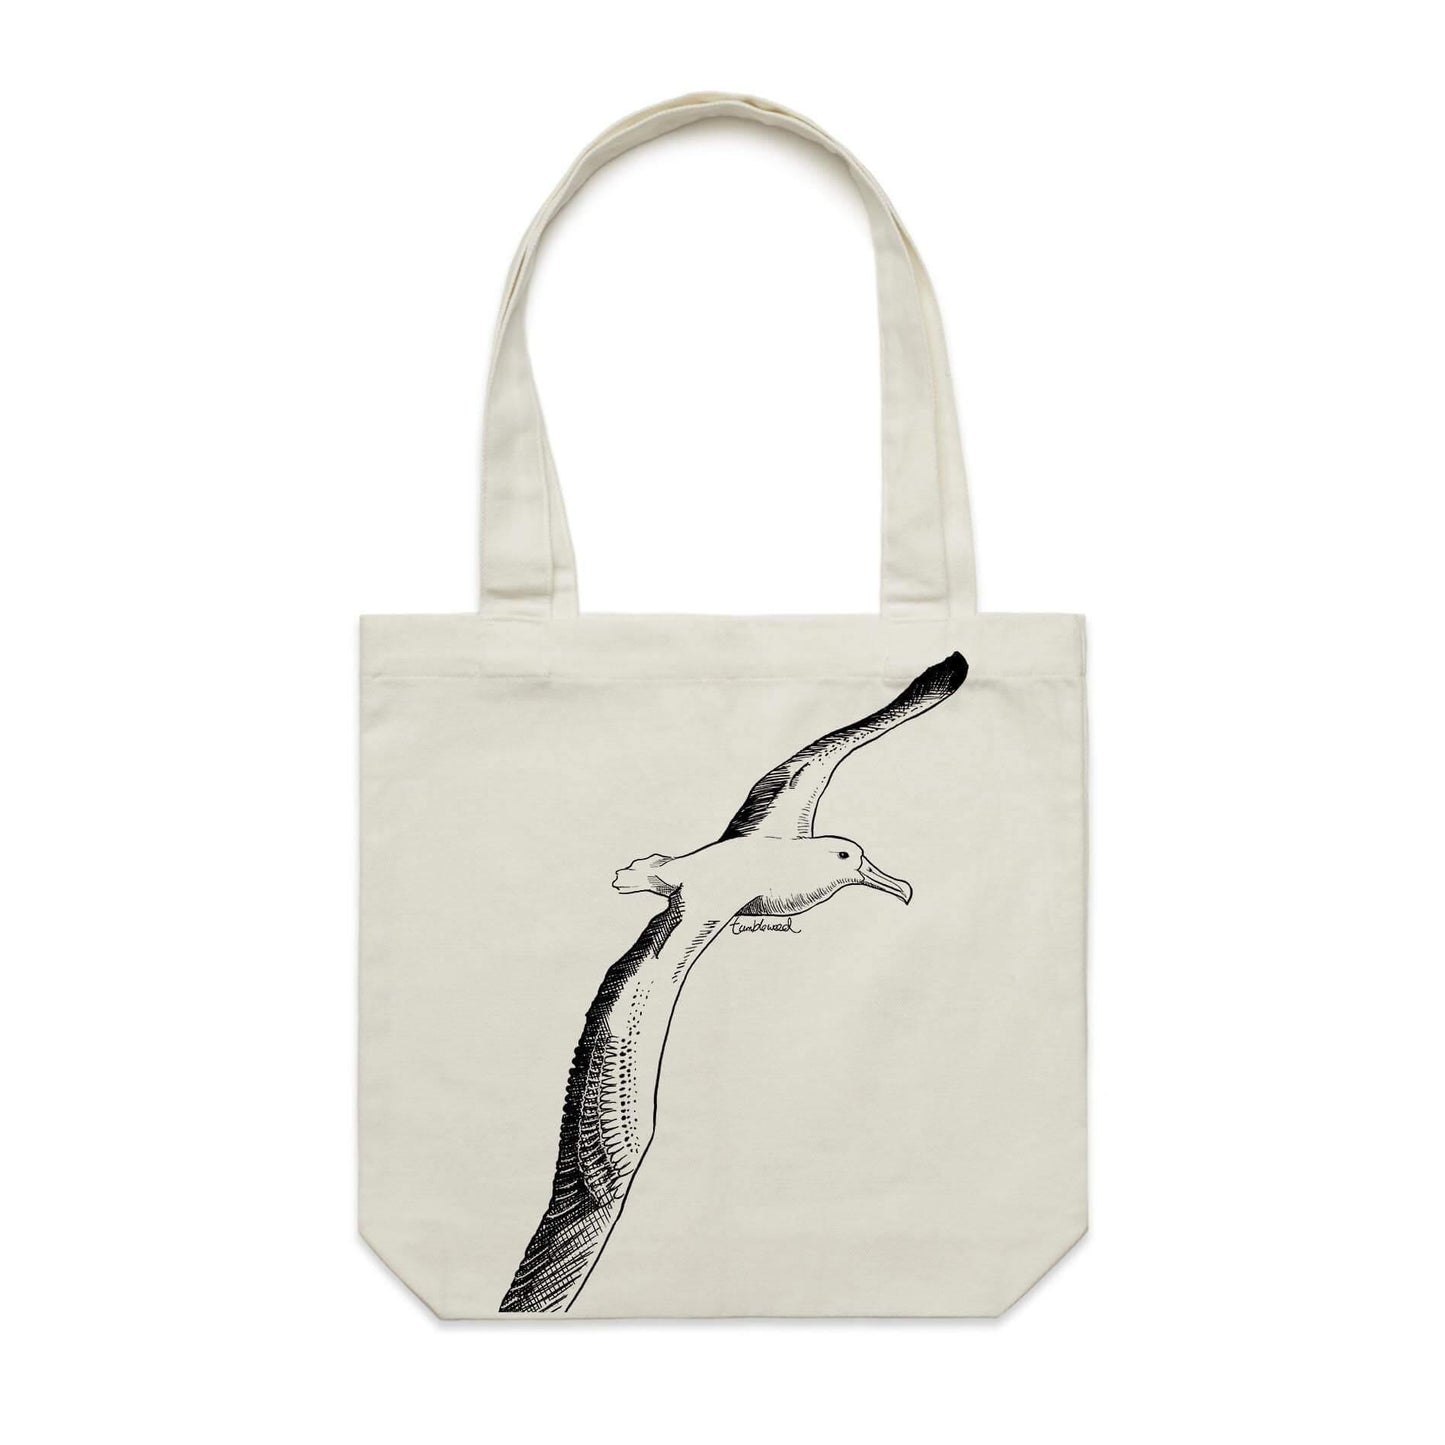 Cotton canvas tote bag with a screen printed Albatross design.